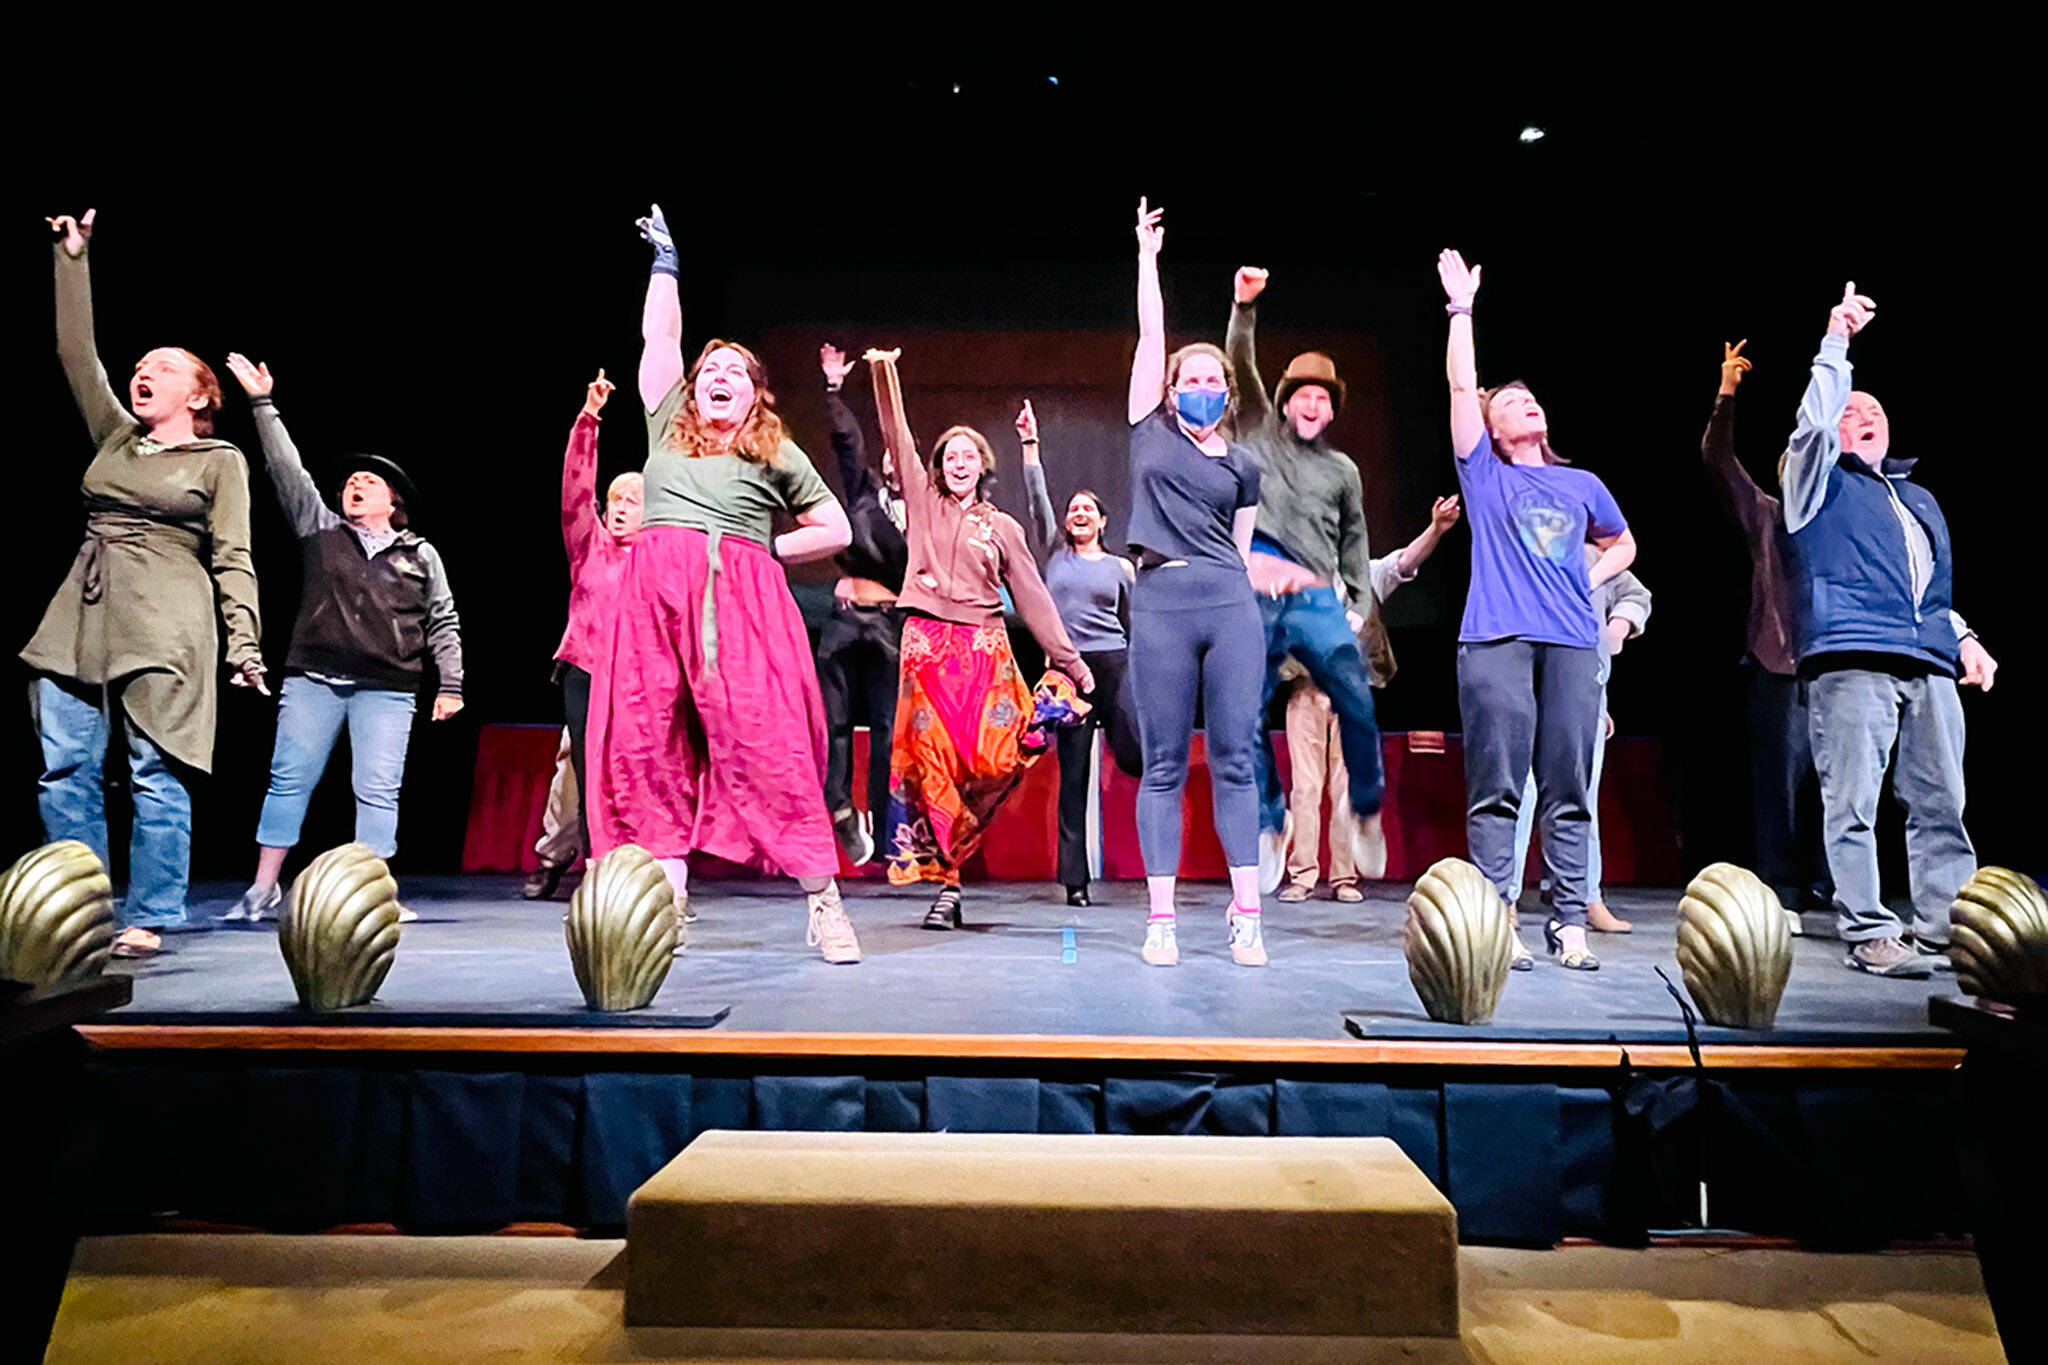 Sequim Gazette photo by Matthew Nash/ Cast members practice a dance number for “The Mystery of Edwin Drood” at Olympic Theatre Arts, which runs three weekends March 10-26. The musical comedy invites audience members’ participation to vote on the murderer, and more.